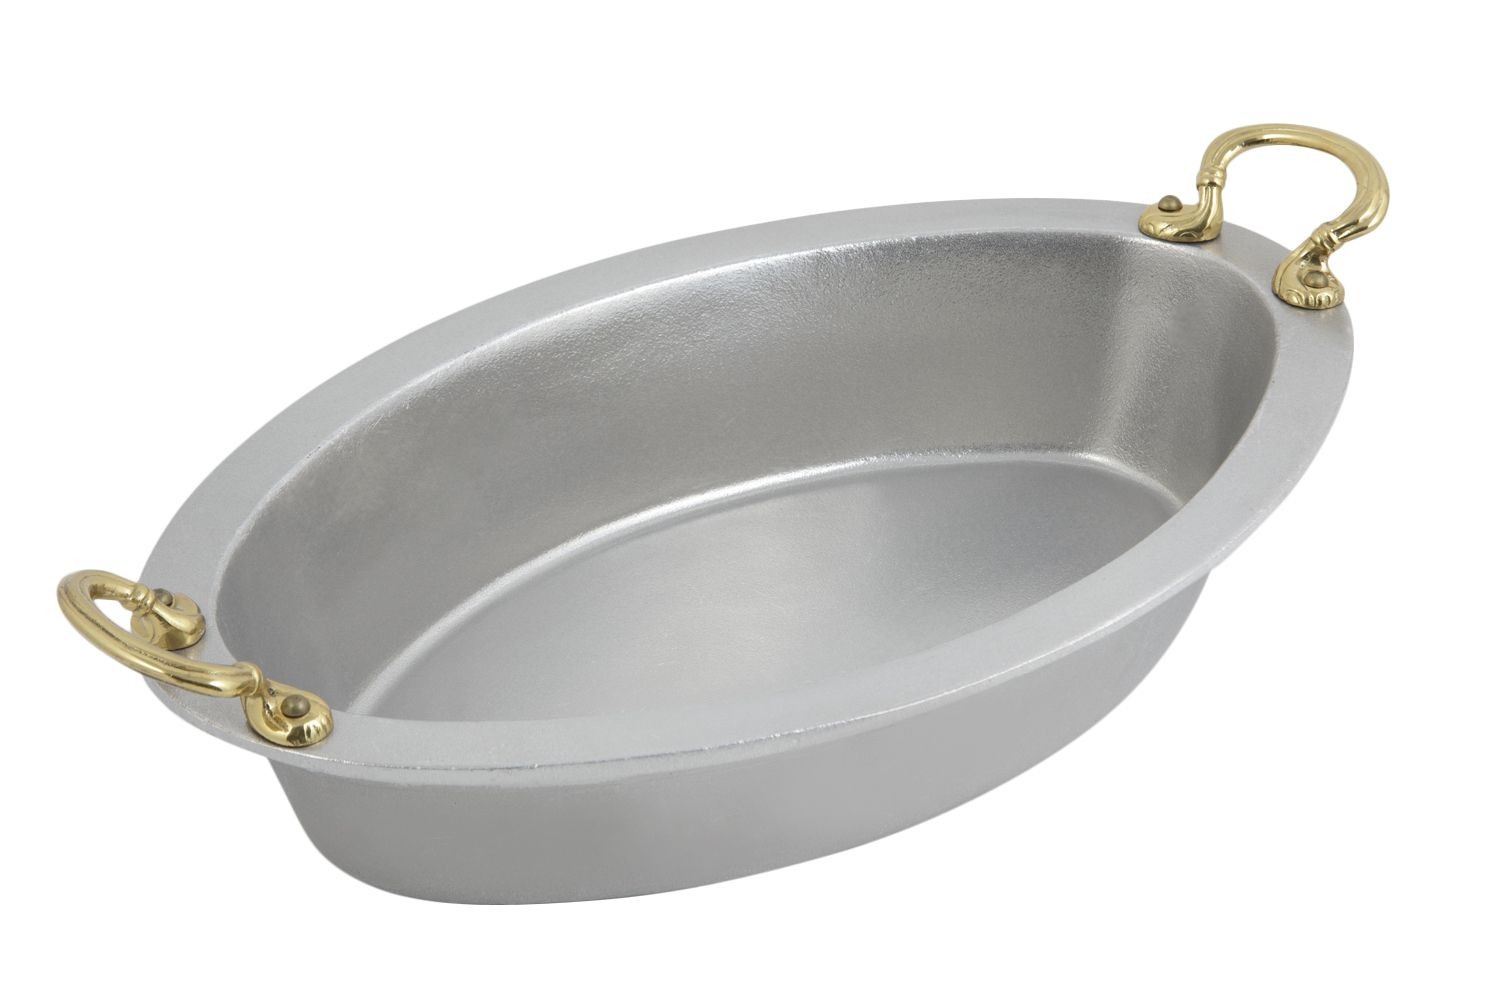 Bon Chef 5099HRS Oval Casserole Dish with Round Brass Handles, Pewter Glo 7 Qt.